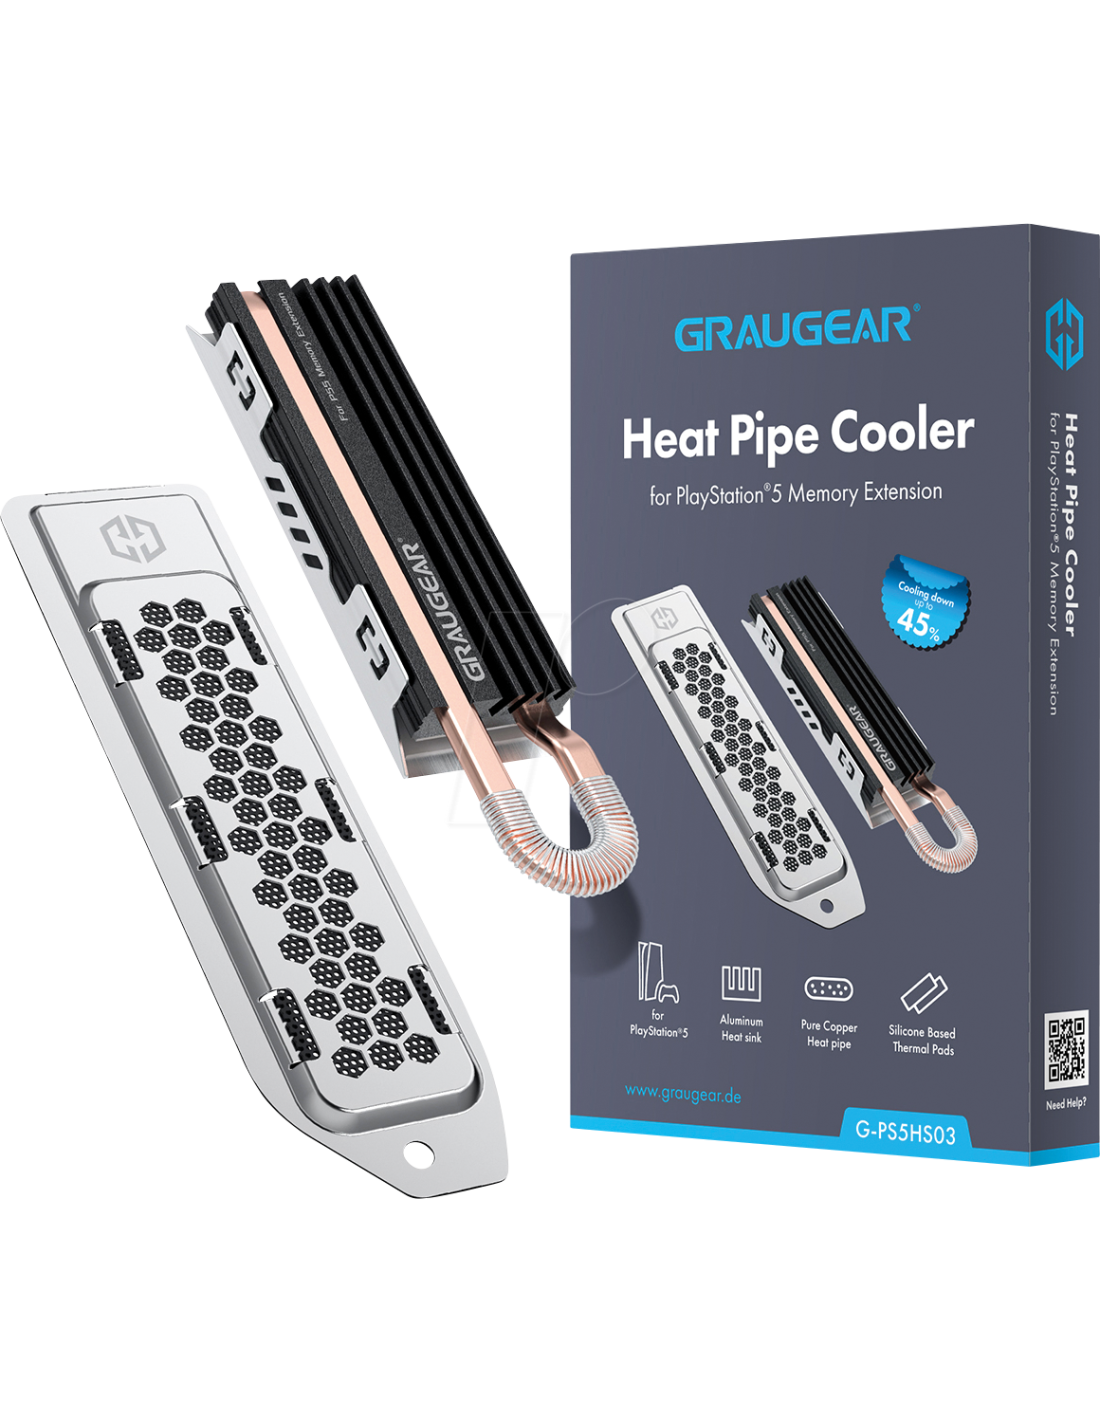 M.2 NVMe2280 SSD heatpipe Cooler for PS5, Cover with Ventilation